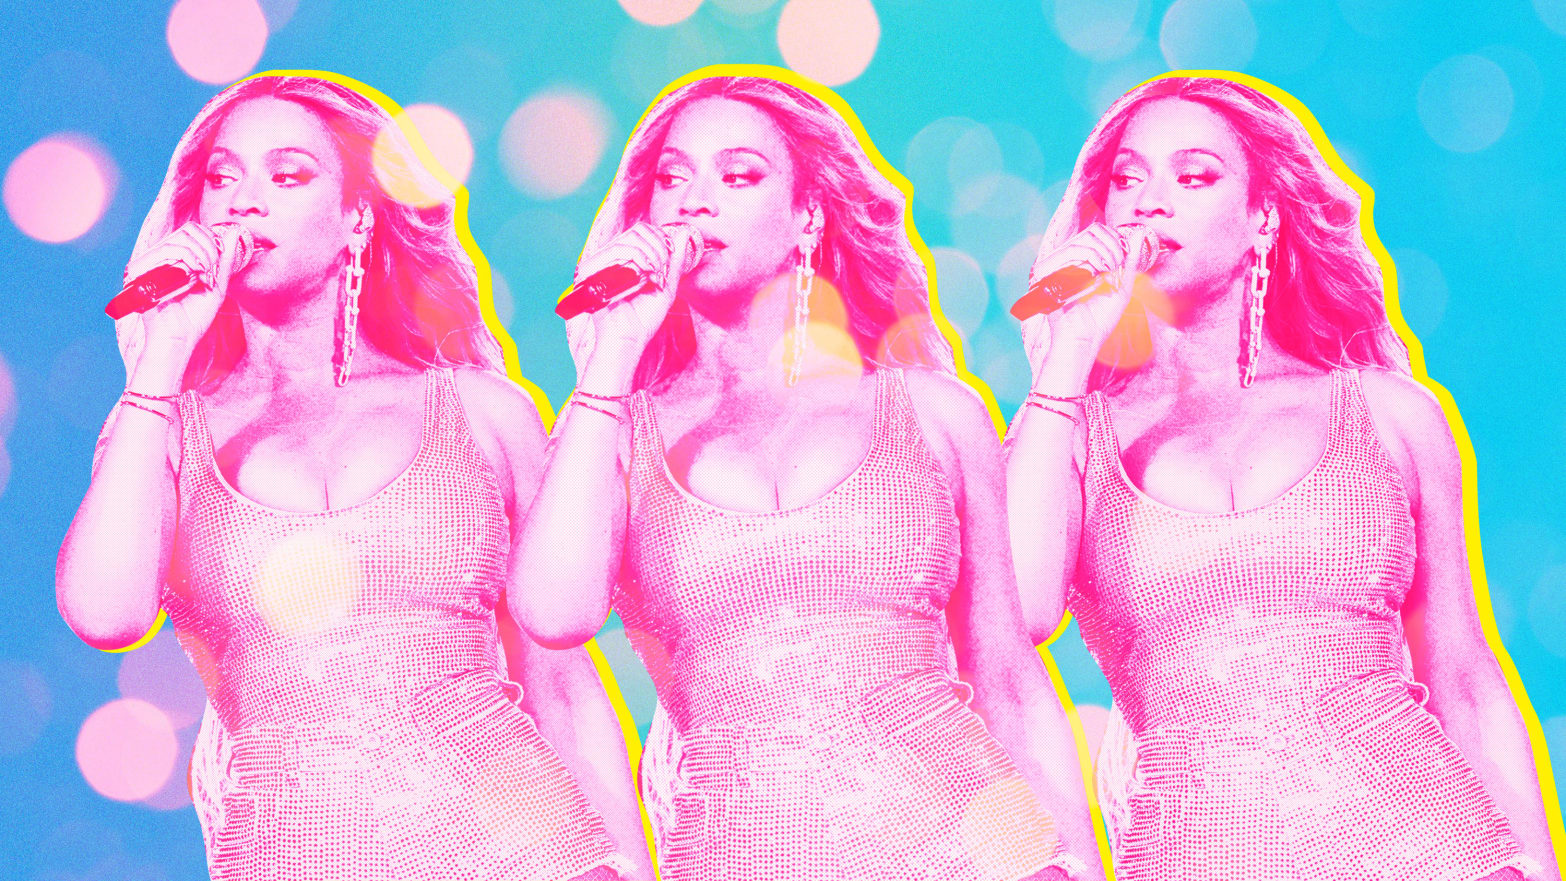 A photo illustration showing Beyonce performing onstage